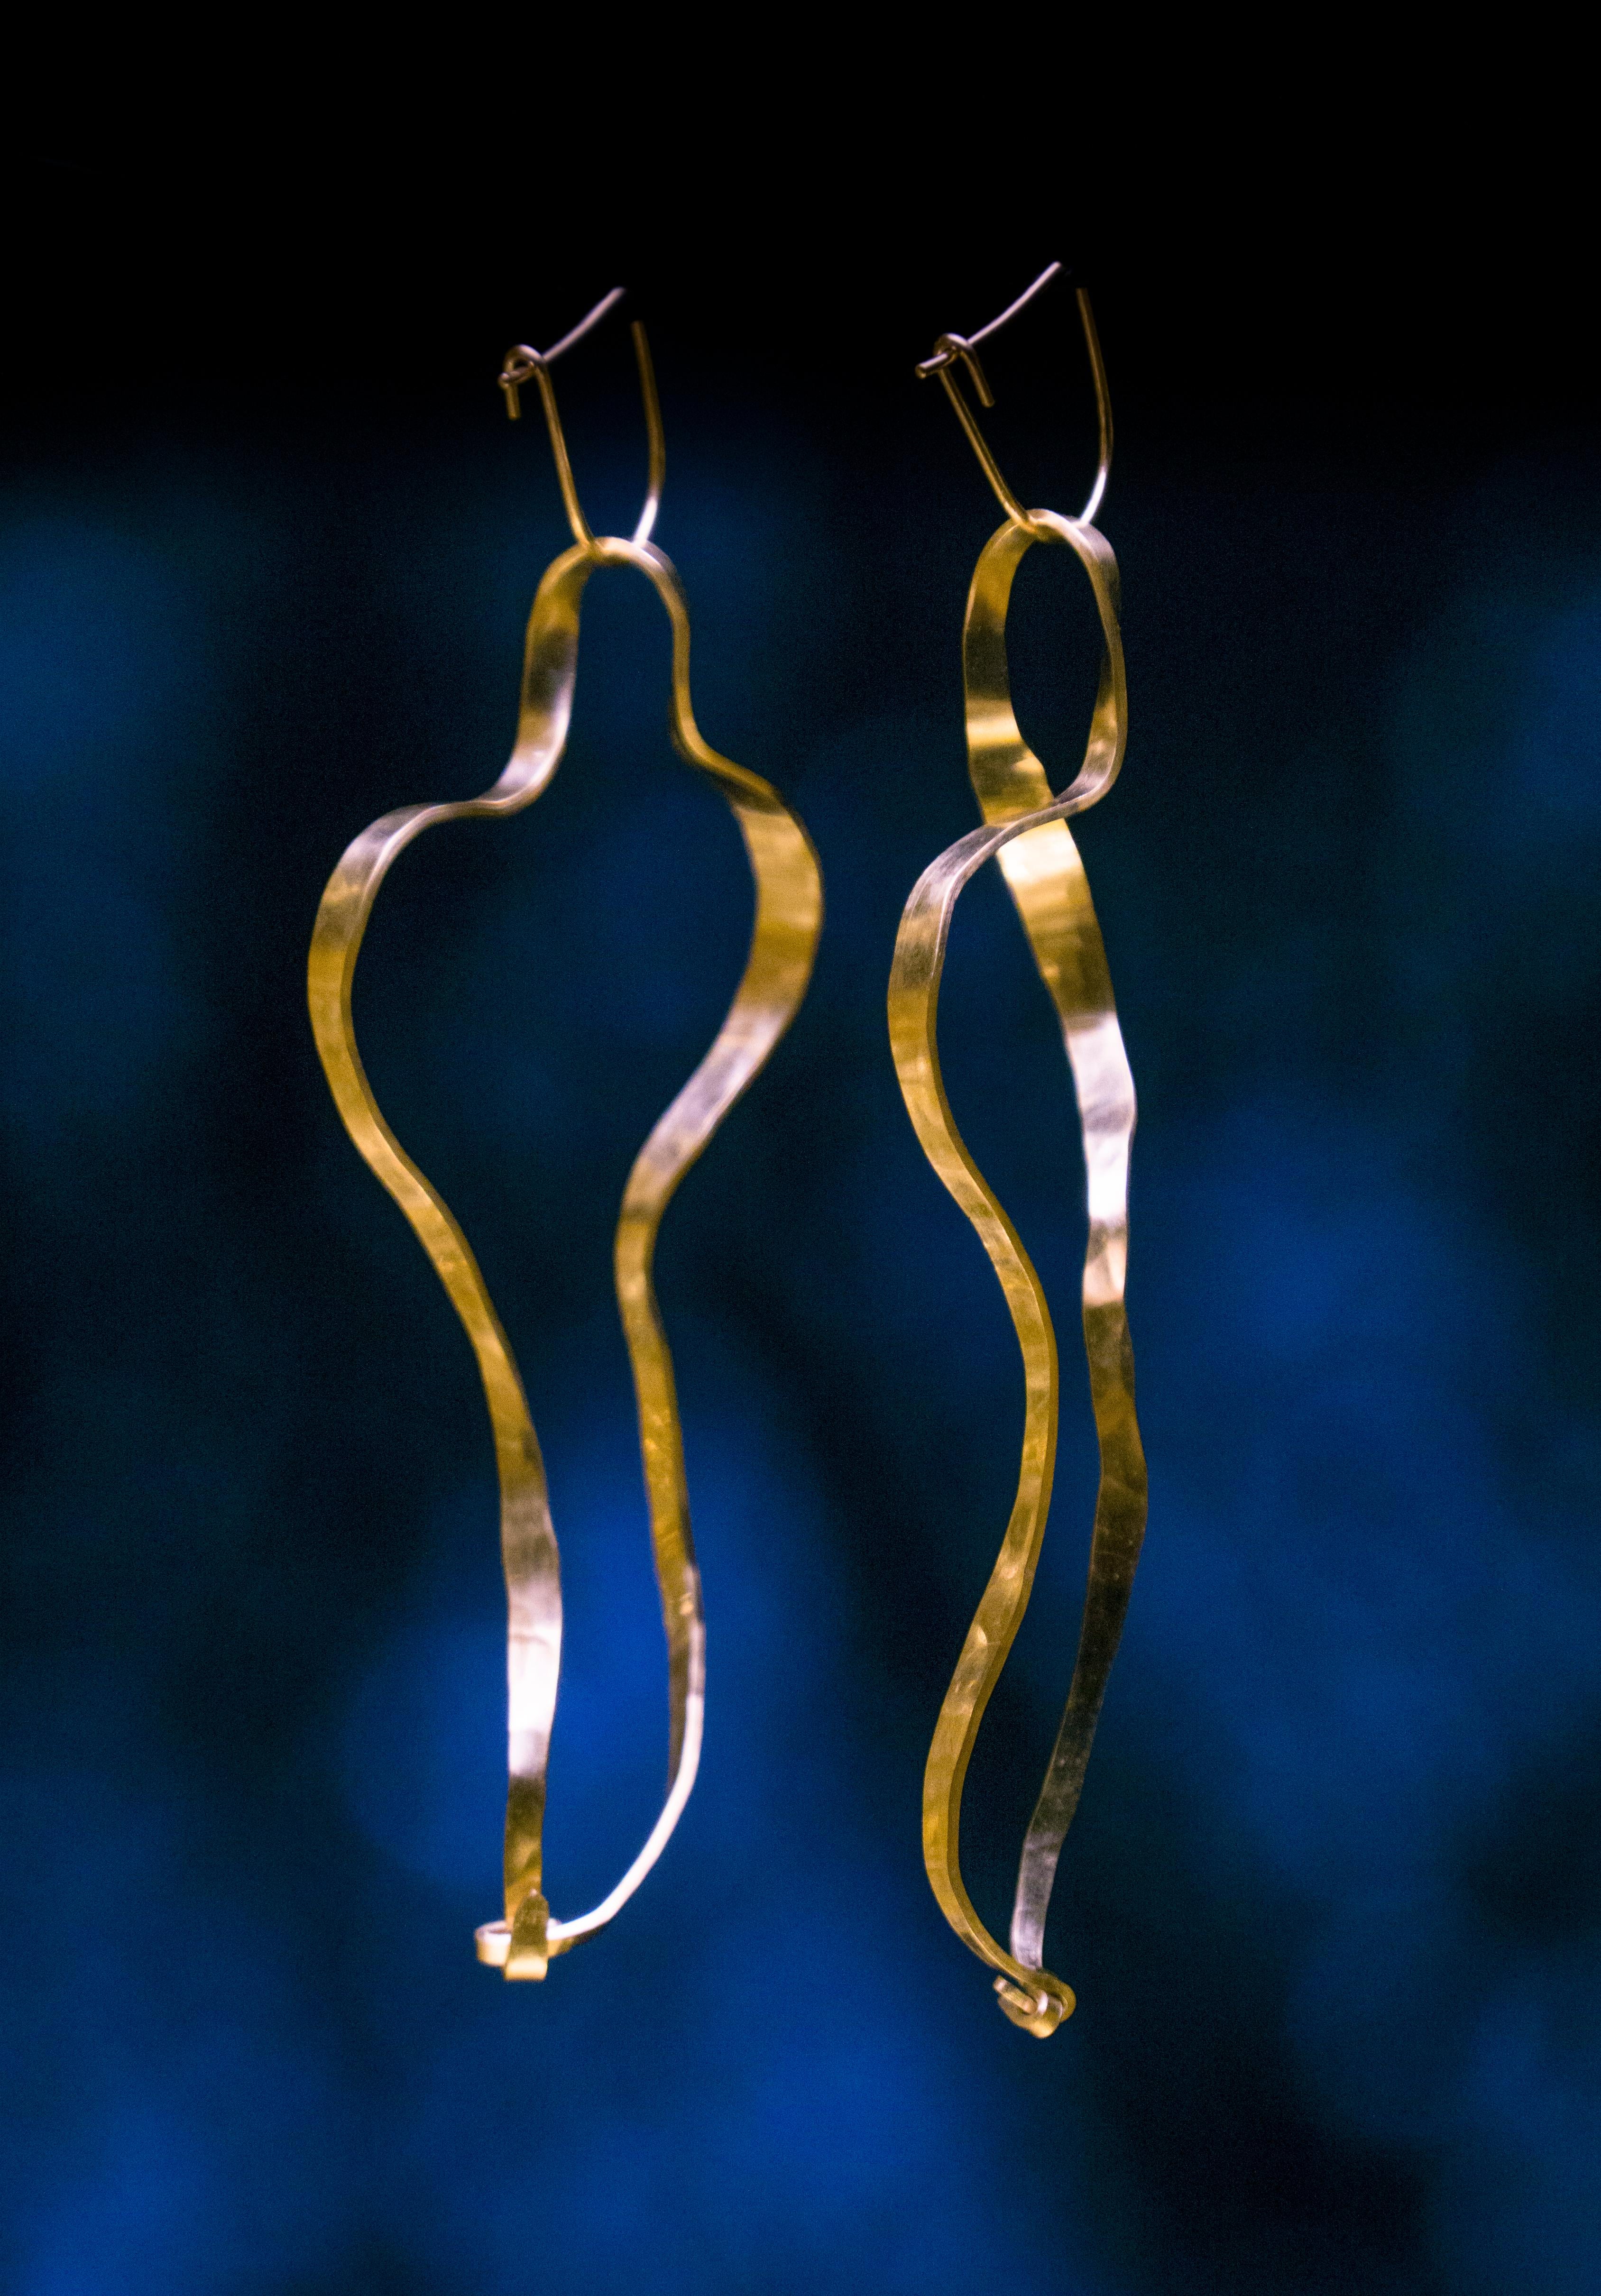 Earrings in gold plated brass by Jacques Jarrige. These timeless pieces echo his large sculptures by the same name.

Jarrige's jewelry is more companion than ornament, heightening one's physical awareness and bestowing the pleasure of inhabiting a